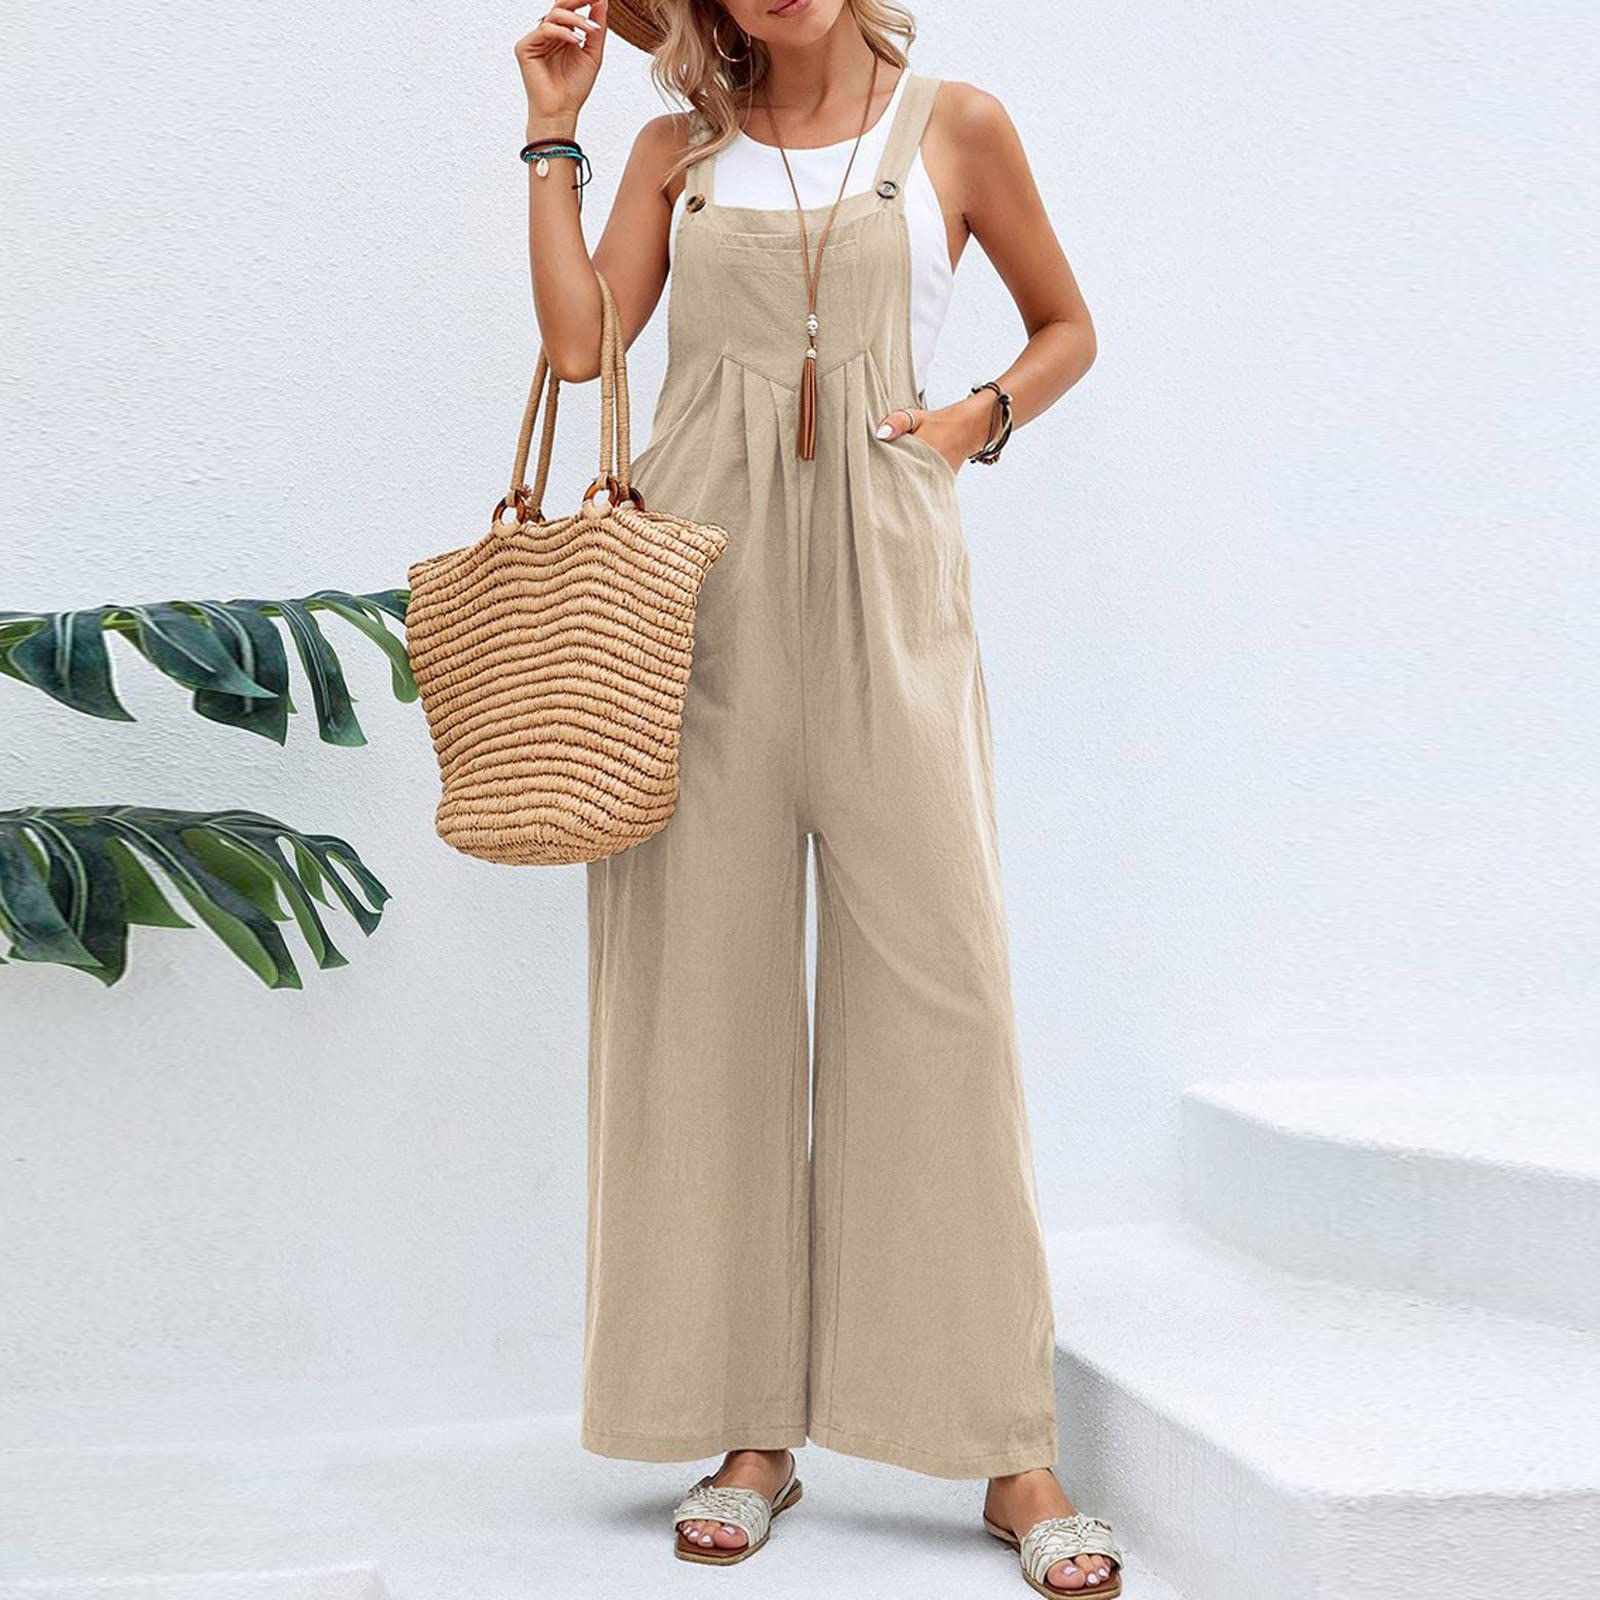 Women's Casual Jumpsuits & Rompers | ASOS